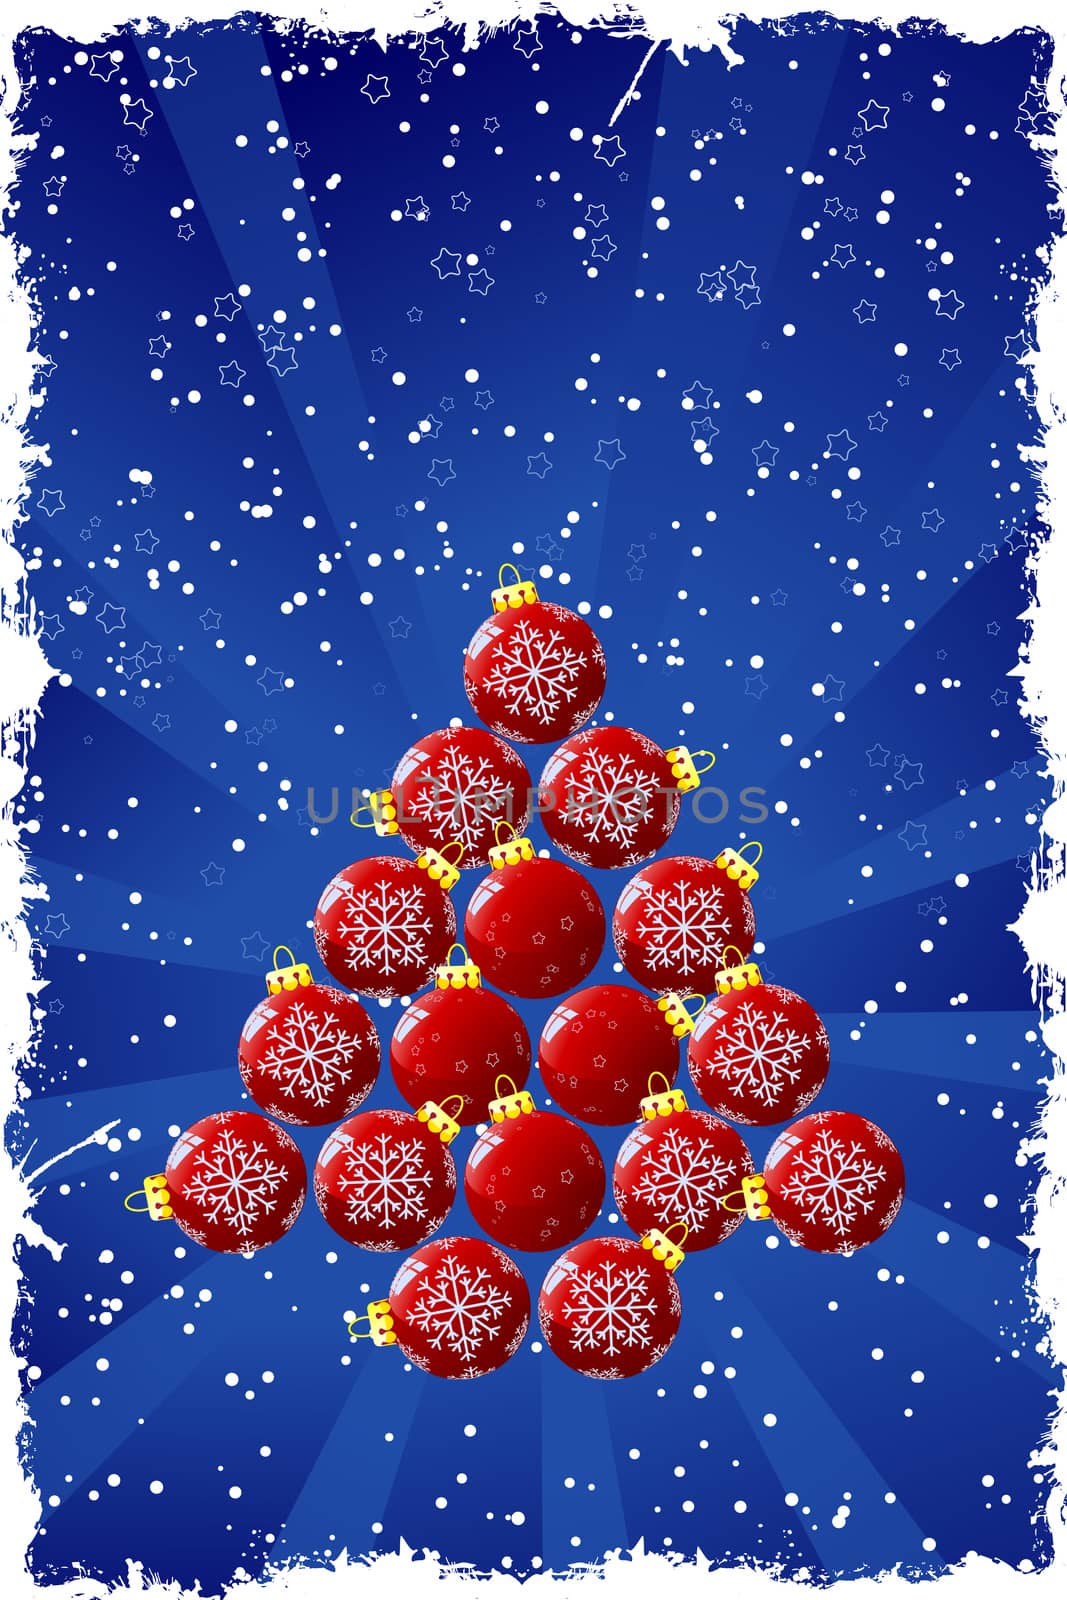 Christmas background with baubles by WaD